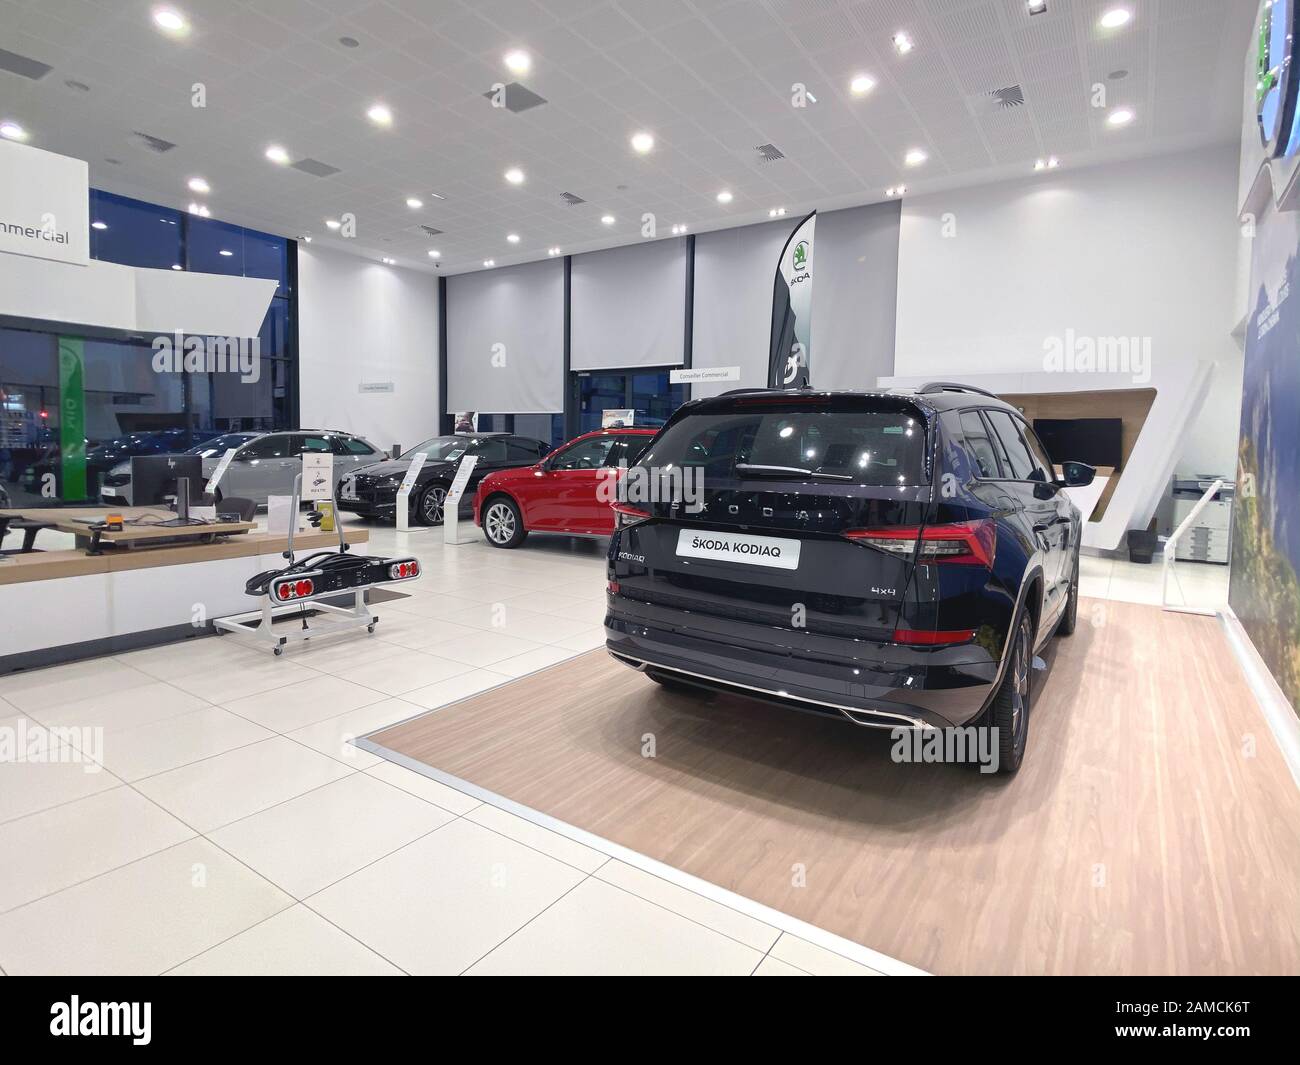 Paris, France - Oct 25, 2019: Wide angle view of car dealership showroom interior with multiple Skoda Cars inside and focus on black Skoda Kodiaq 4x4 SUV Stock Photo